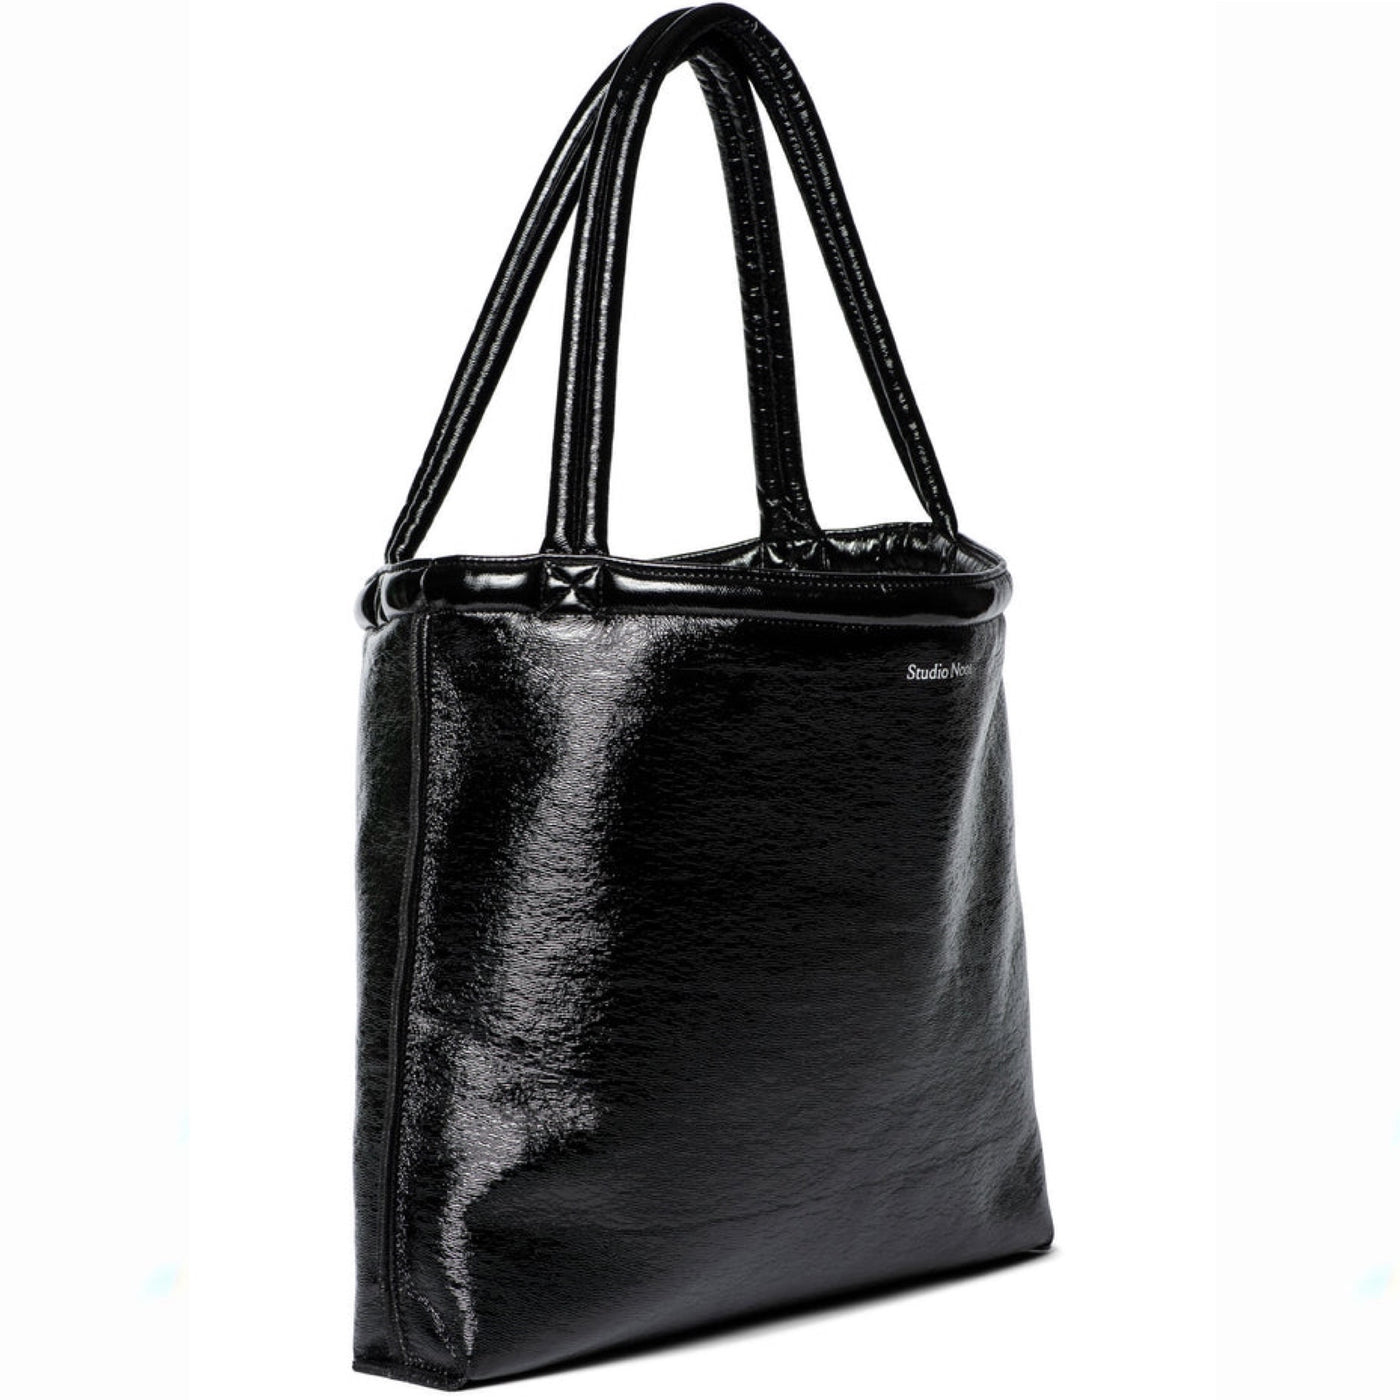 Mombag reversible teddy lacquer